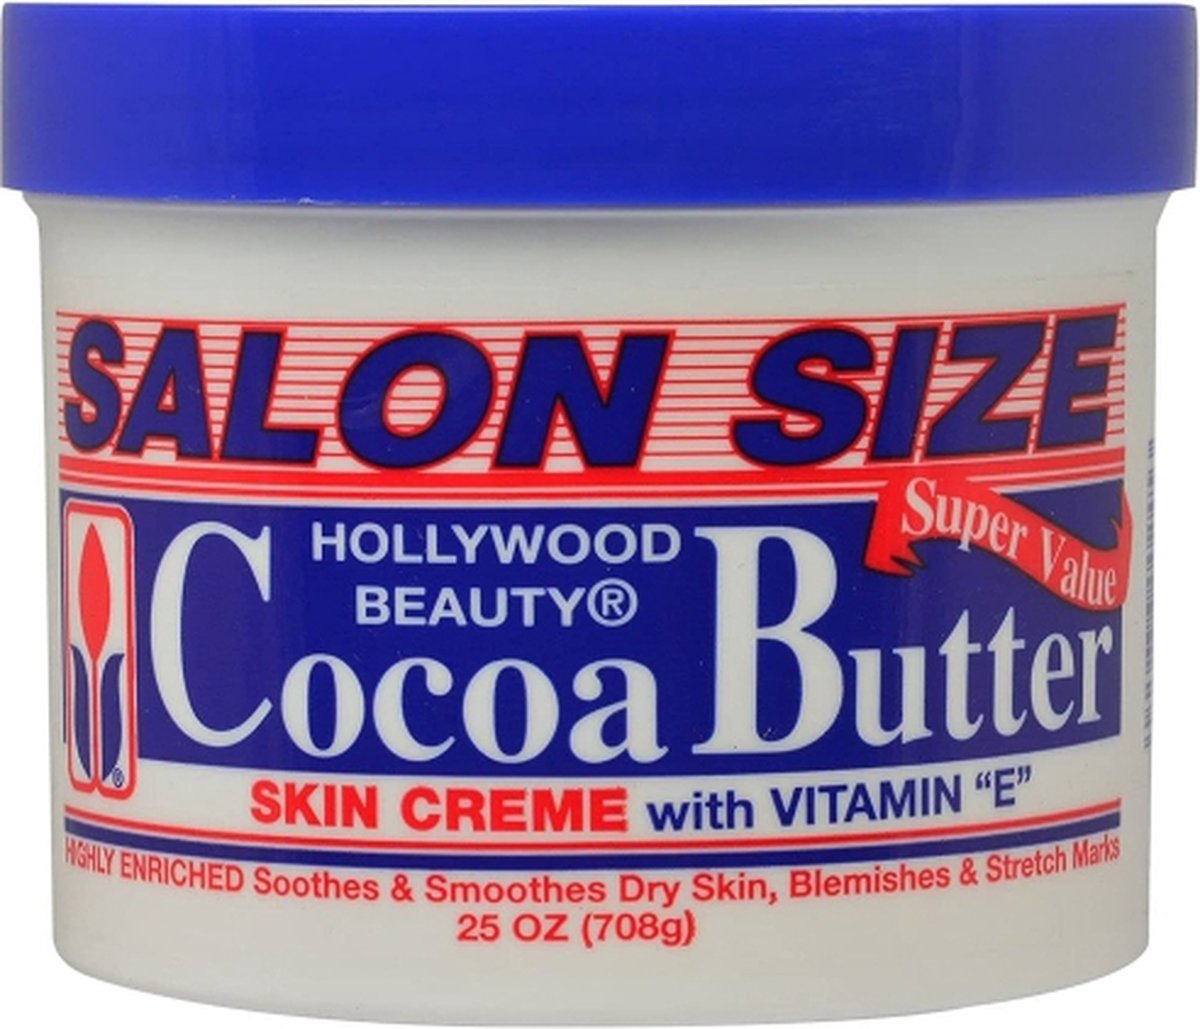 Hollywood Beauty Cocoa Butter Skin Creme 708g